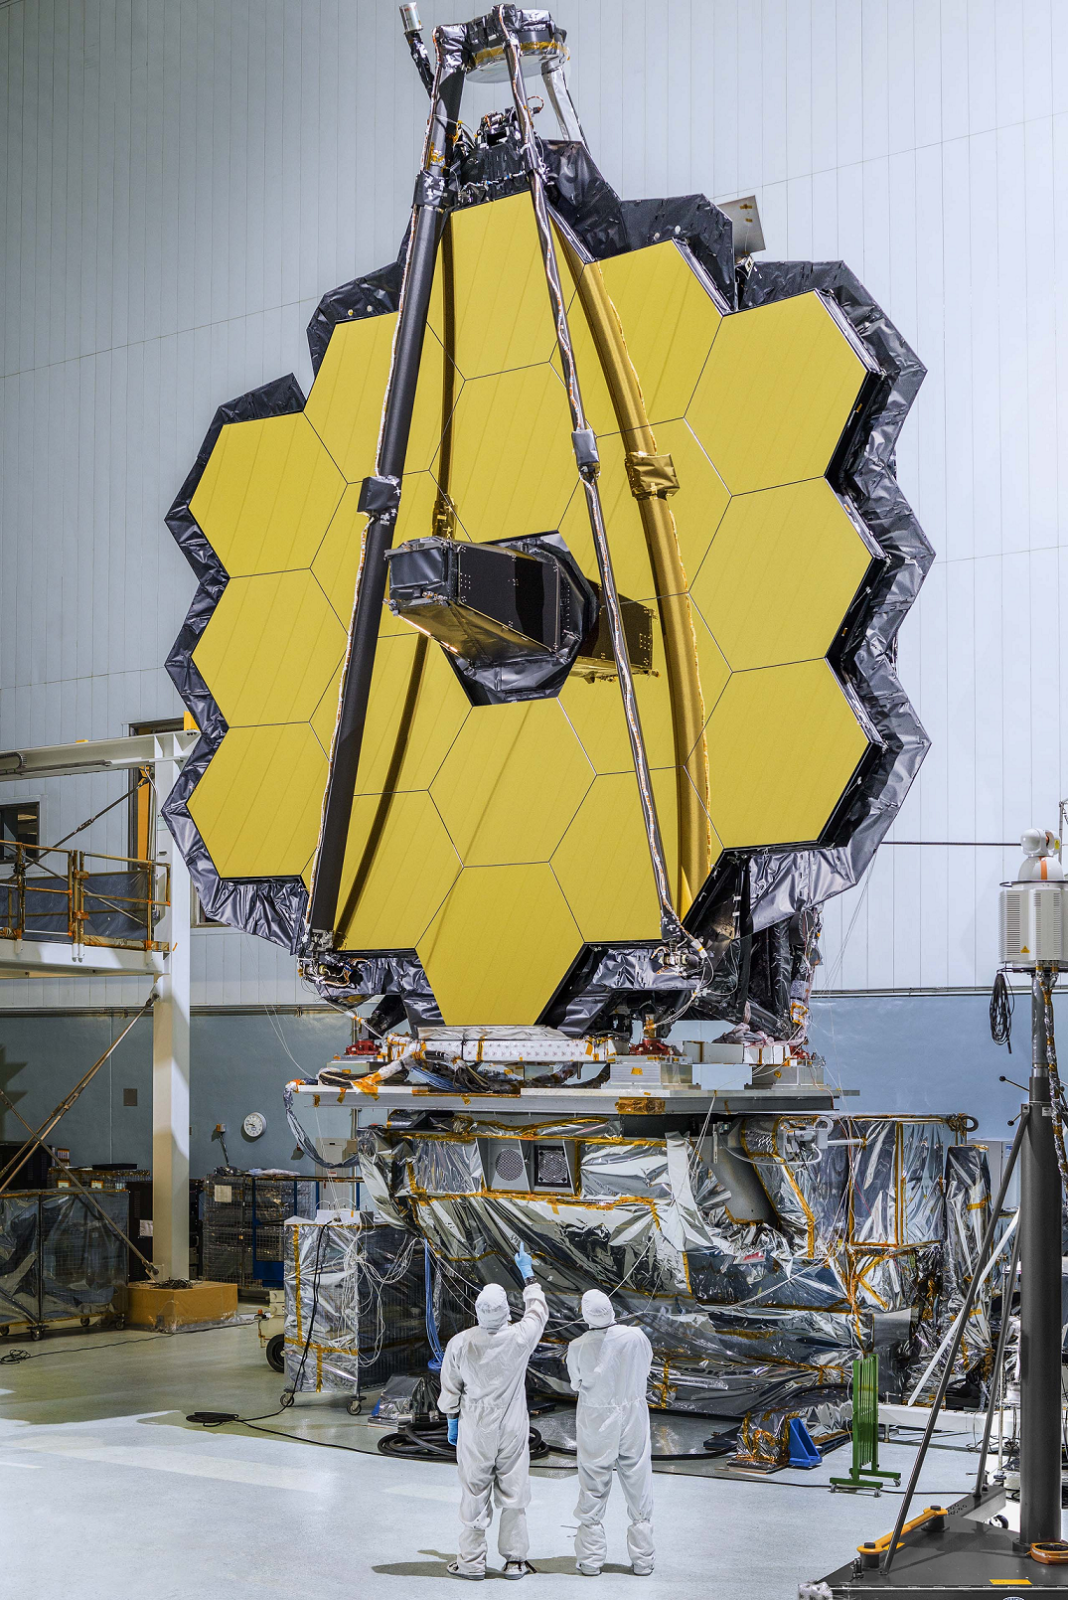 The primary mirror arrangement of the James Webb Space Telescope, set to launch in 2021.  Eighteen hexagonal mirror segments combine to form a massive 'light bucket' with five times the area of Hubble.  Due to its heat sensitivity, the JWST will reside away from Earth vicinity, which will all but preclude visiting astronauts for repair and maintenance.  Incredibly complex but highly capable, the JWST should be a most worthy successor to the Hubble.